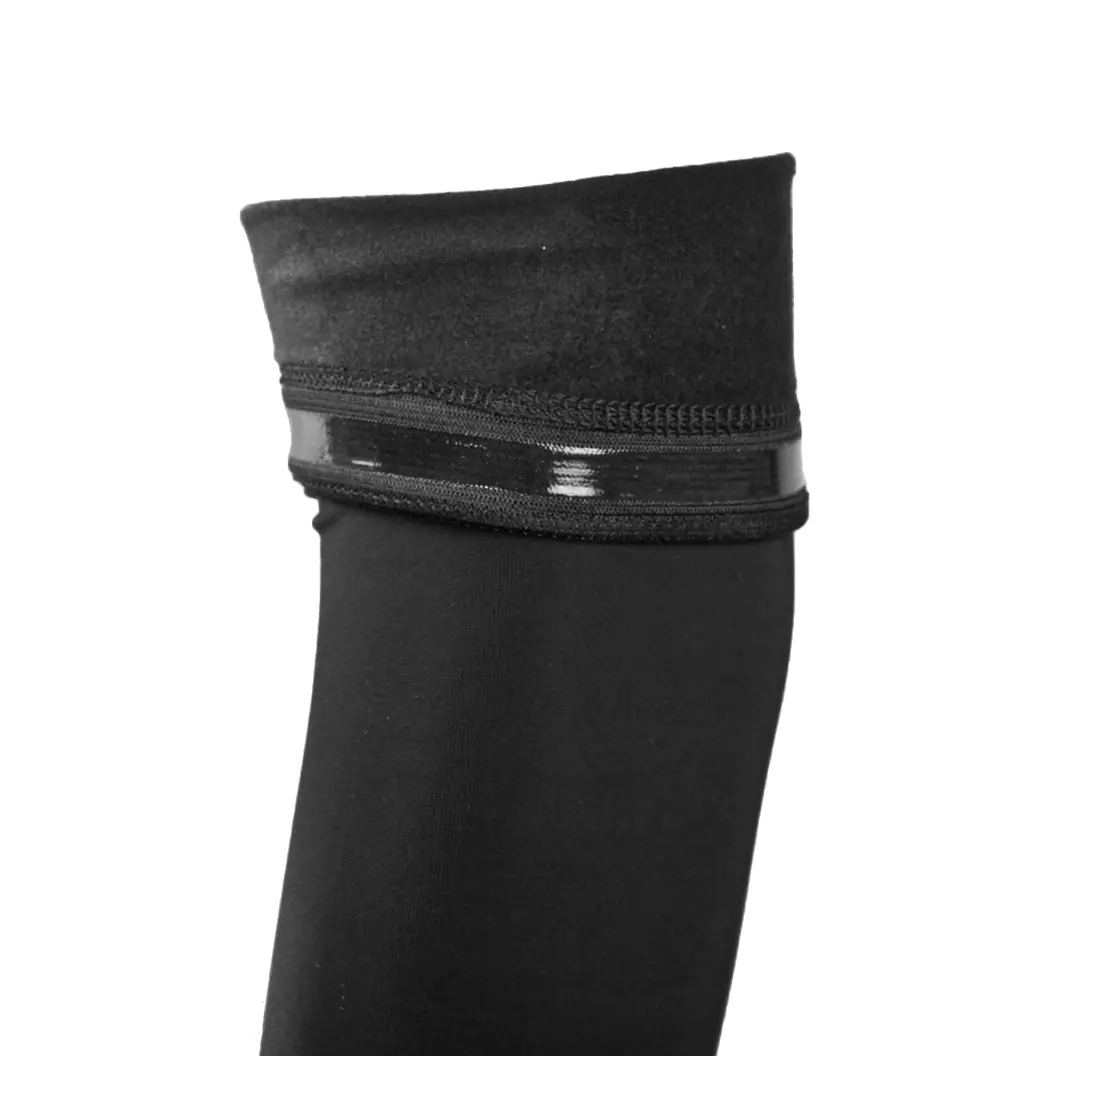 MikeSPORT - SUPERROUBAIX 2014W insulated cycling sleeves